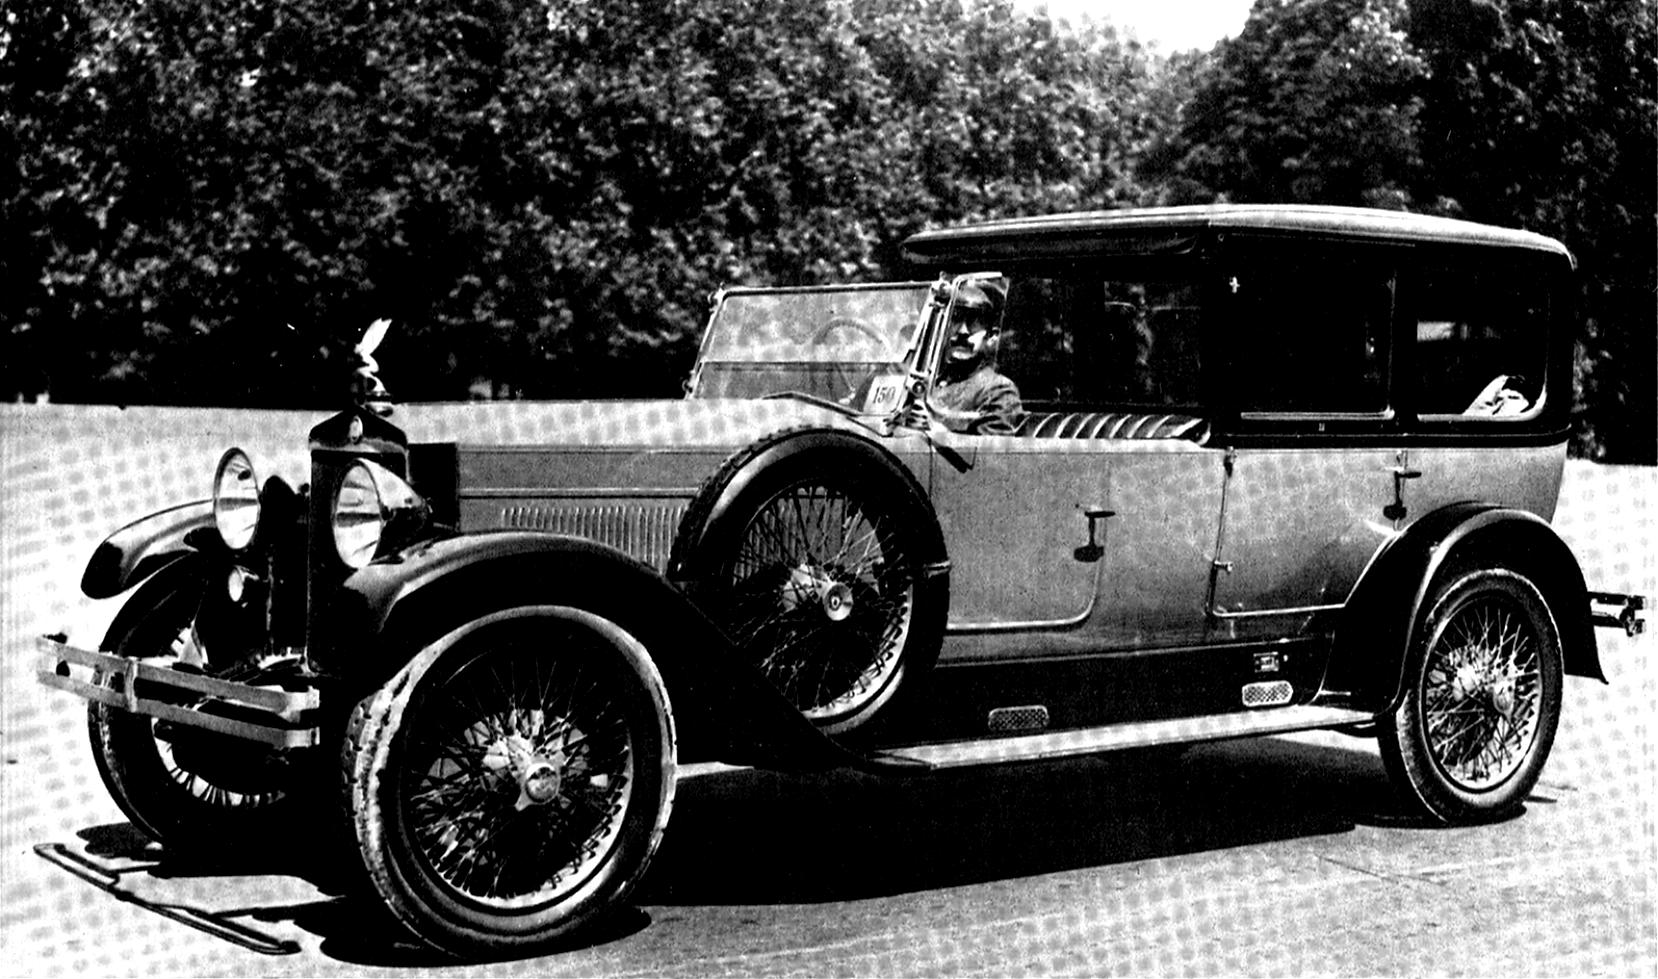 Fiat 519 Coupe 1922 #1